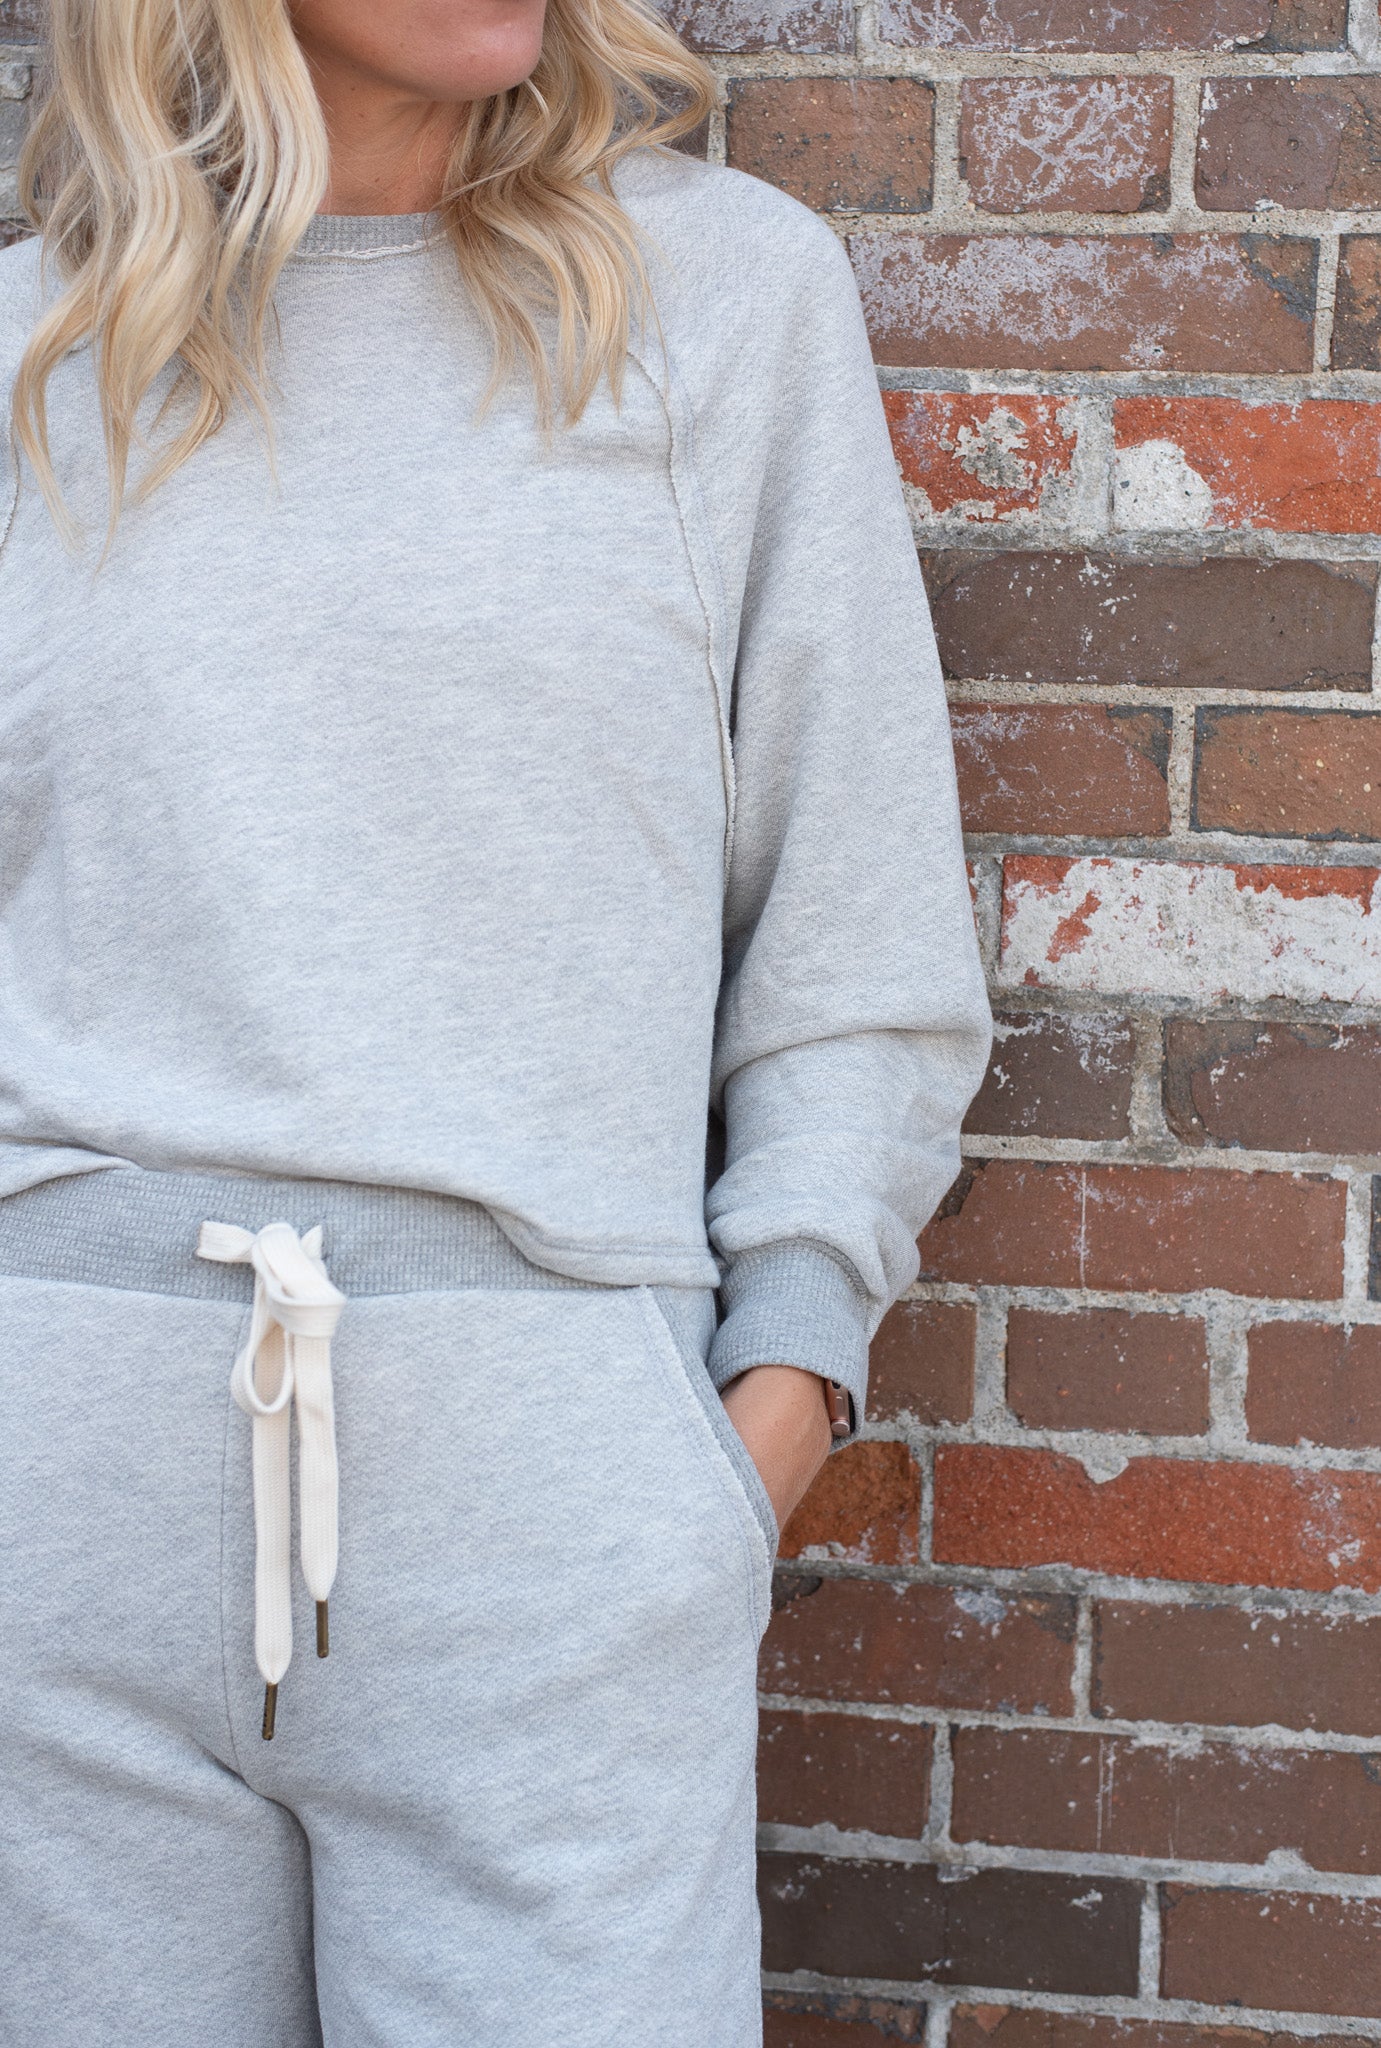 New Day Heathered Jogger - Lulie